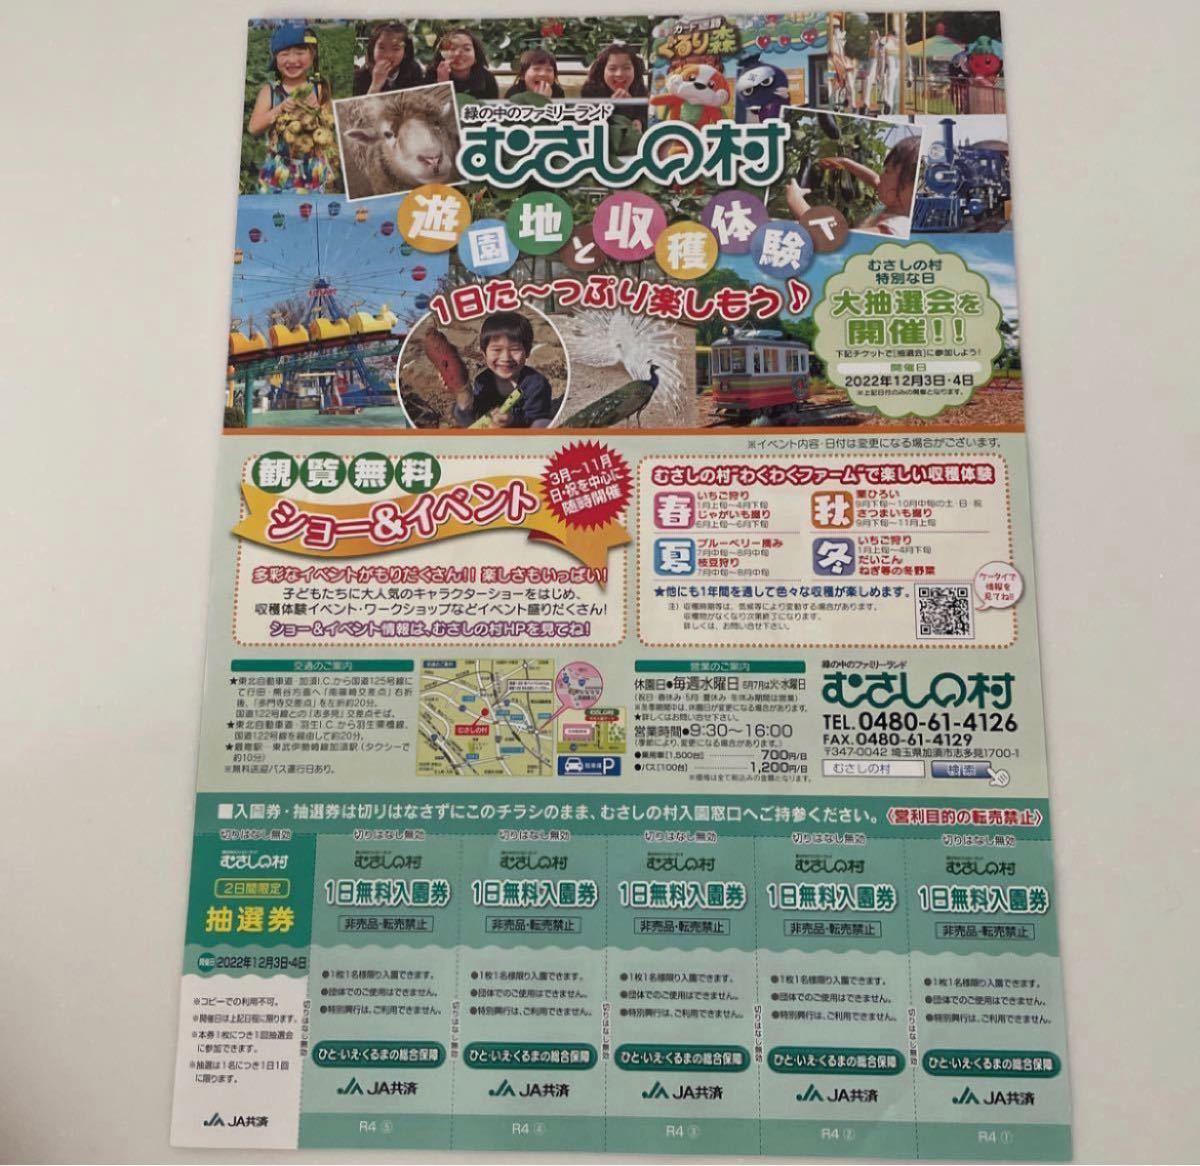 PayPayフリマ｜むさしの村 最新版 入園券 むさしの村 チケット 無料入園券 遊園地 動物園 5枚綴 ×1枚 2023 5 31迄有効